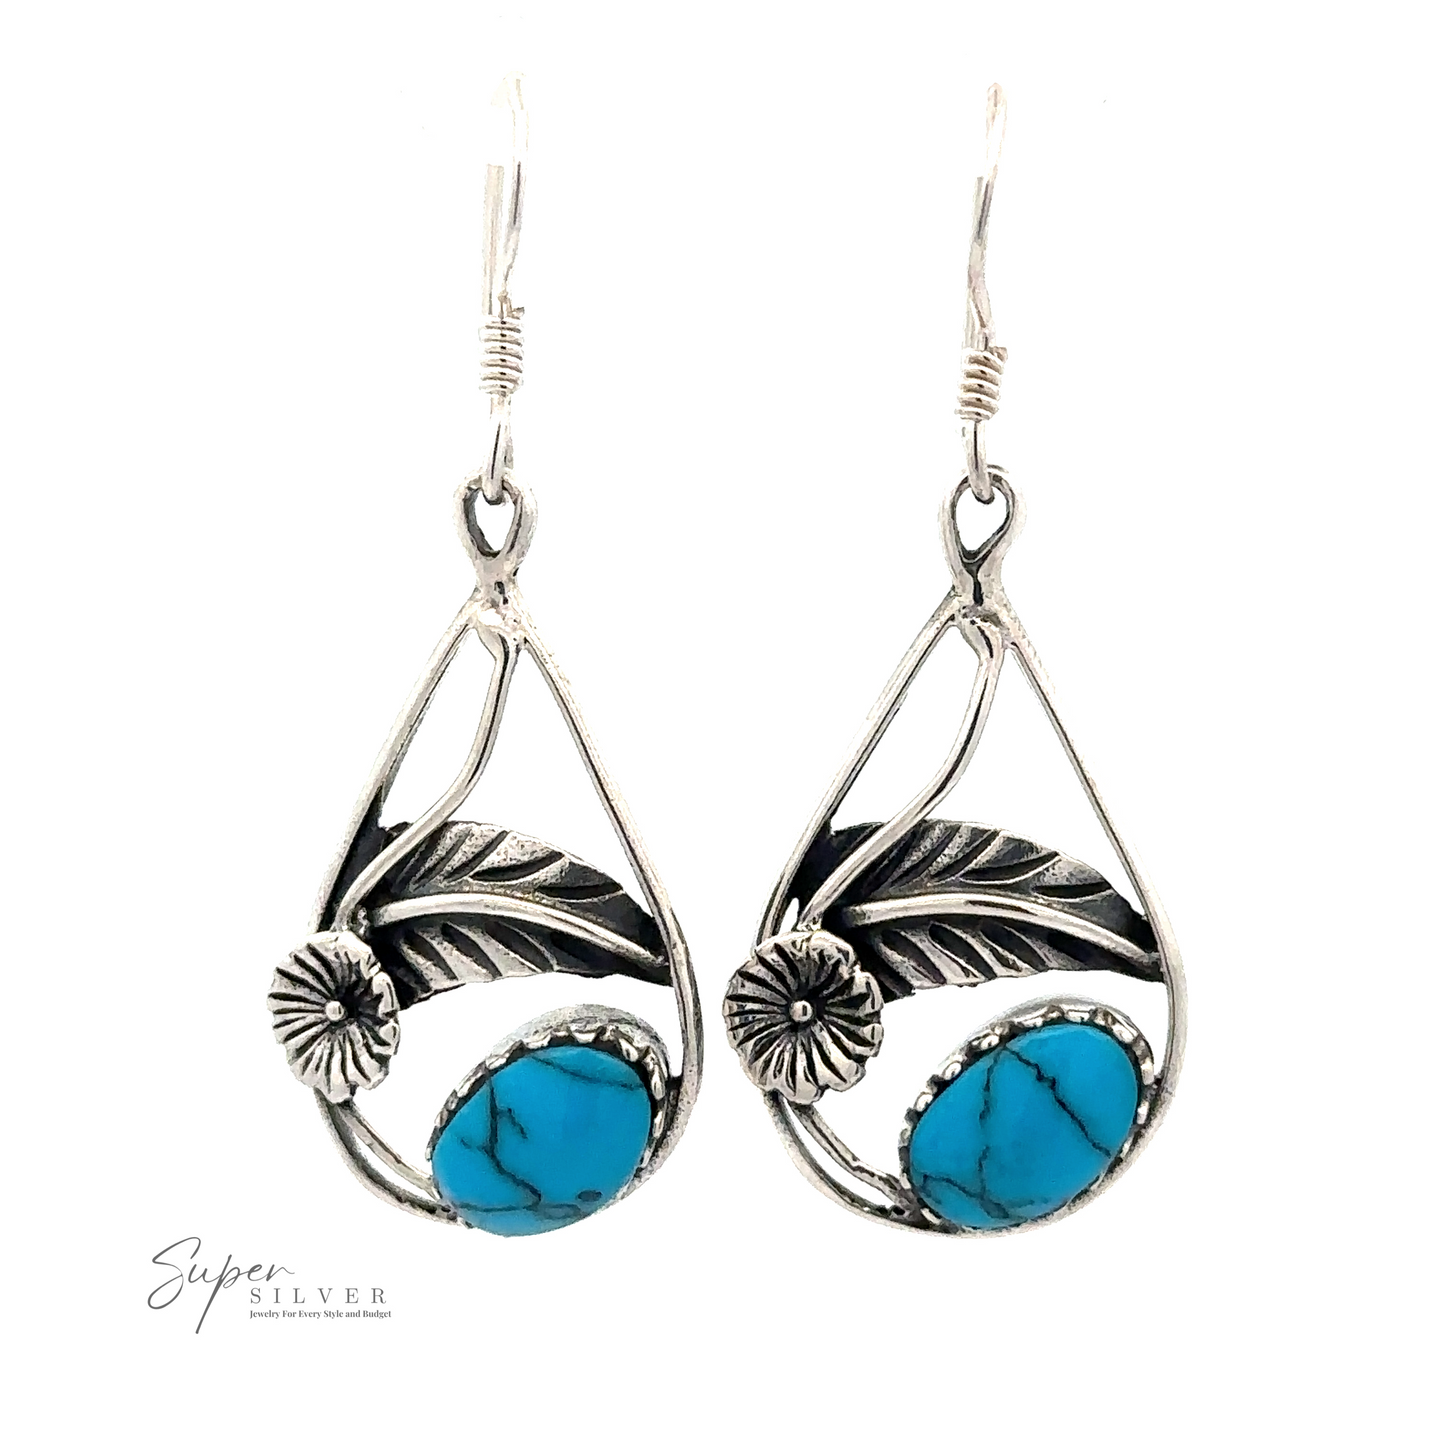 
                  
                    Inlaid Teardrop Earrings With Floral Setting, featuring blue turquoise stones. "Super Silver" branding visible in the bottom left corner.
                  
                